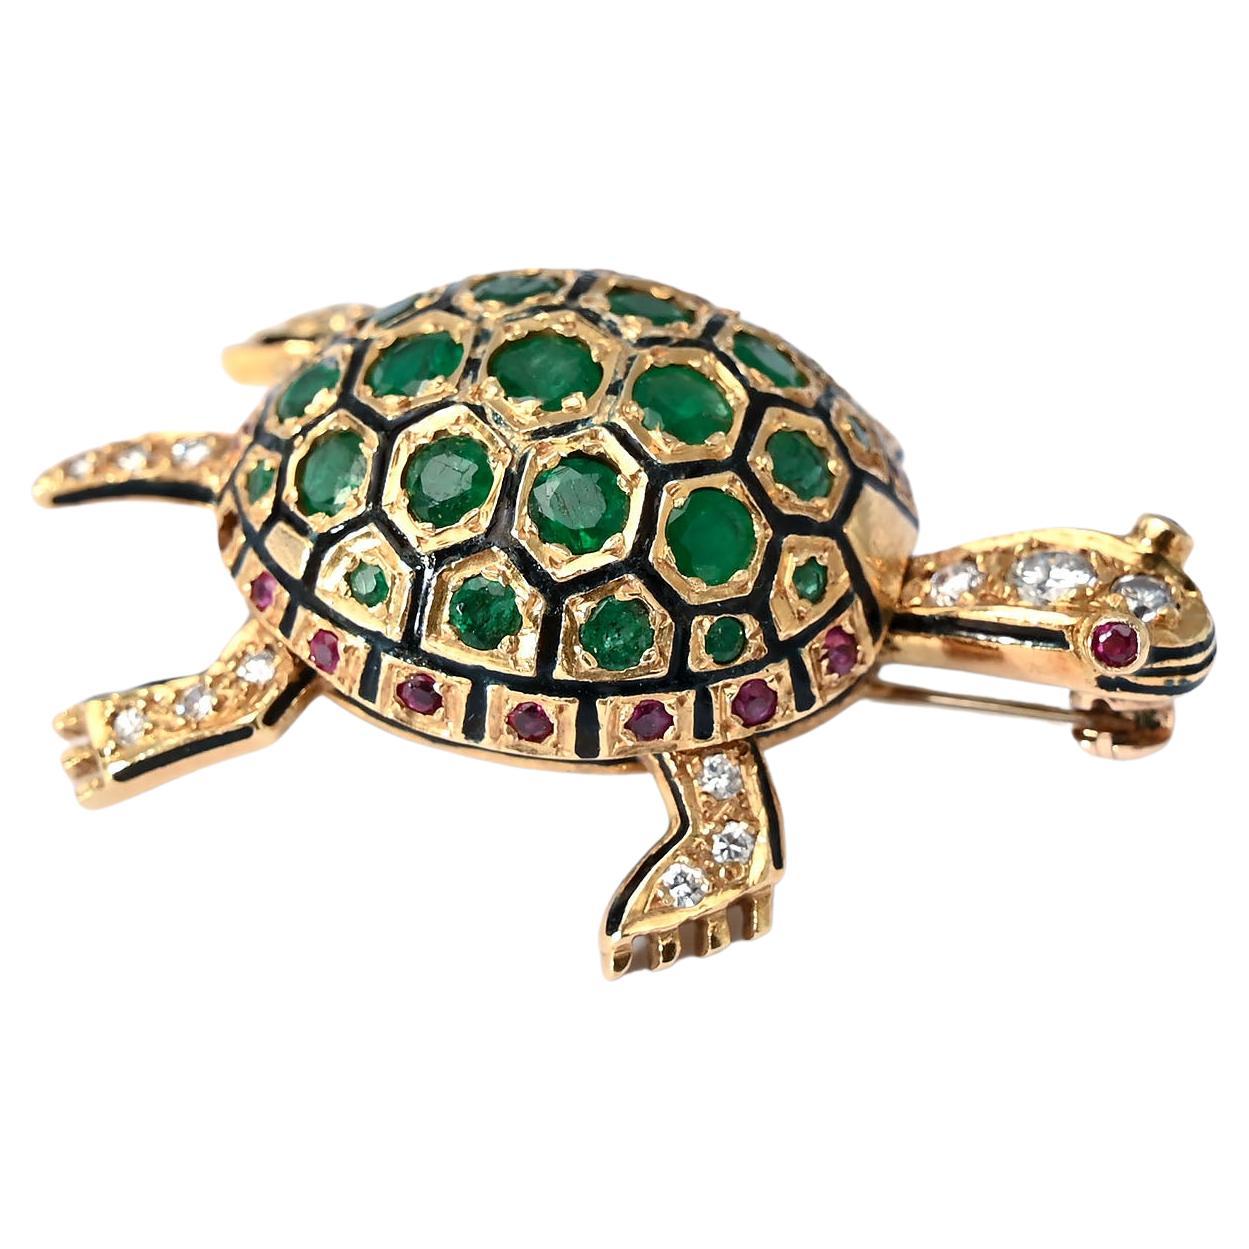 Hammerman Brothers Gold and Emerald Turtle Brooch